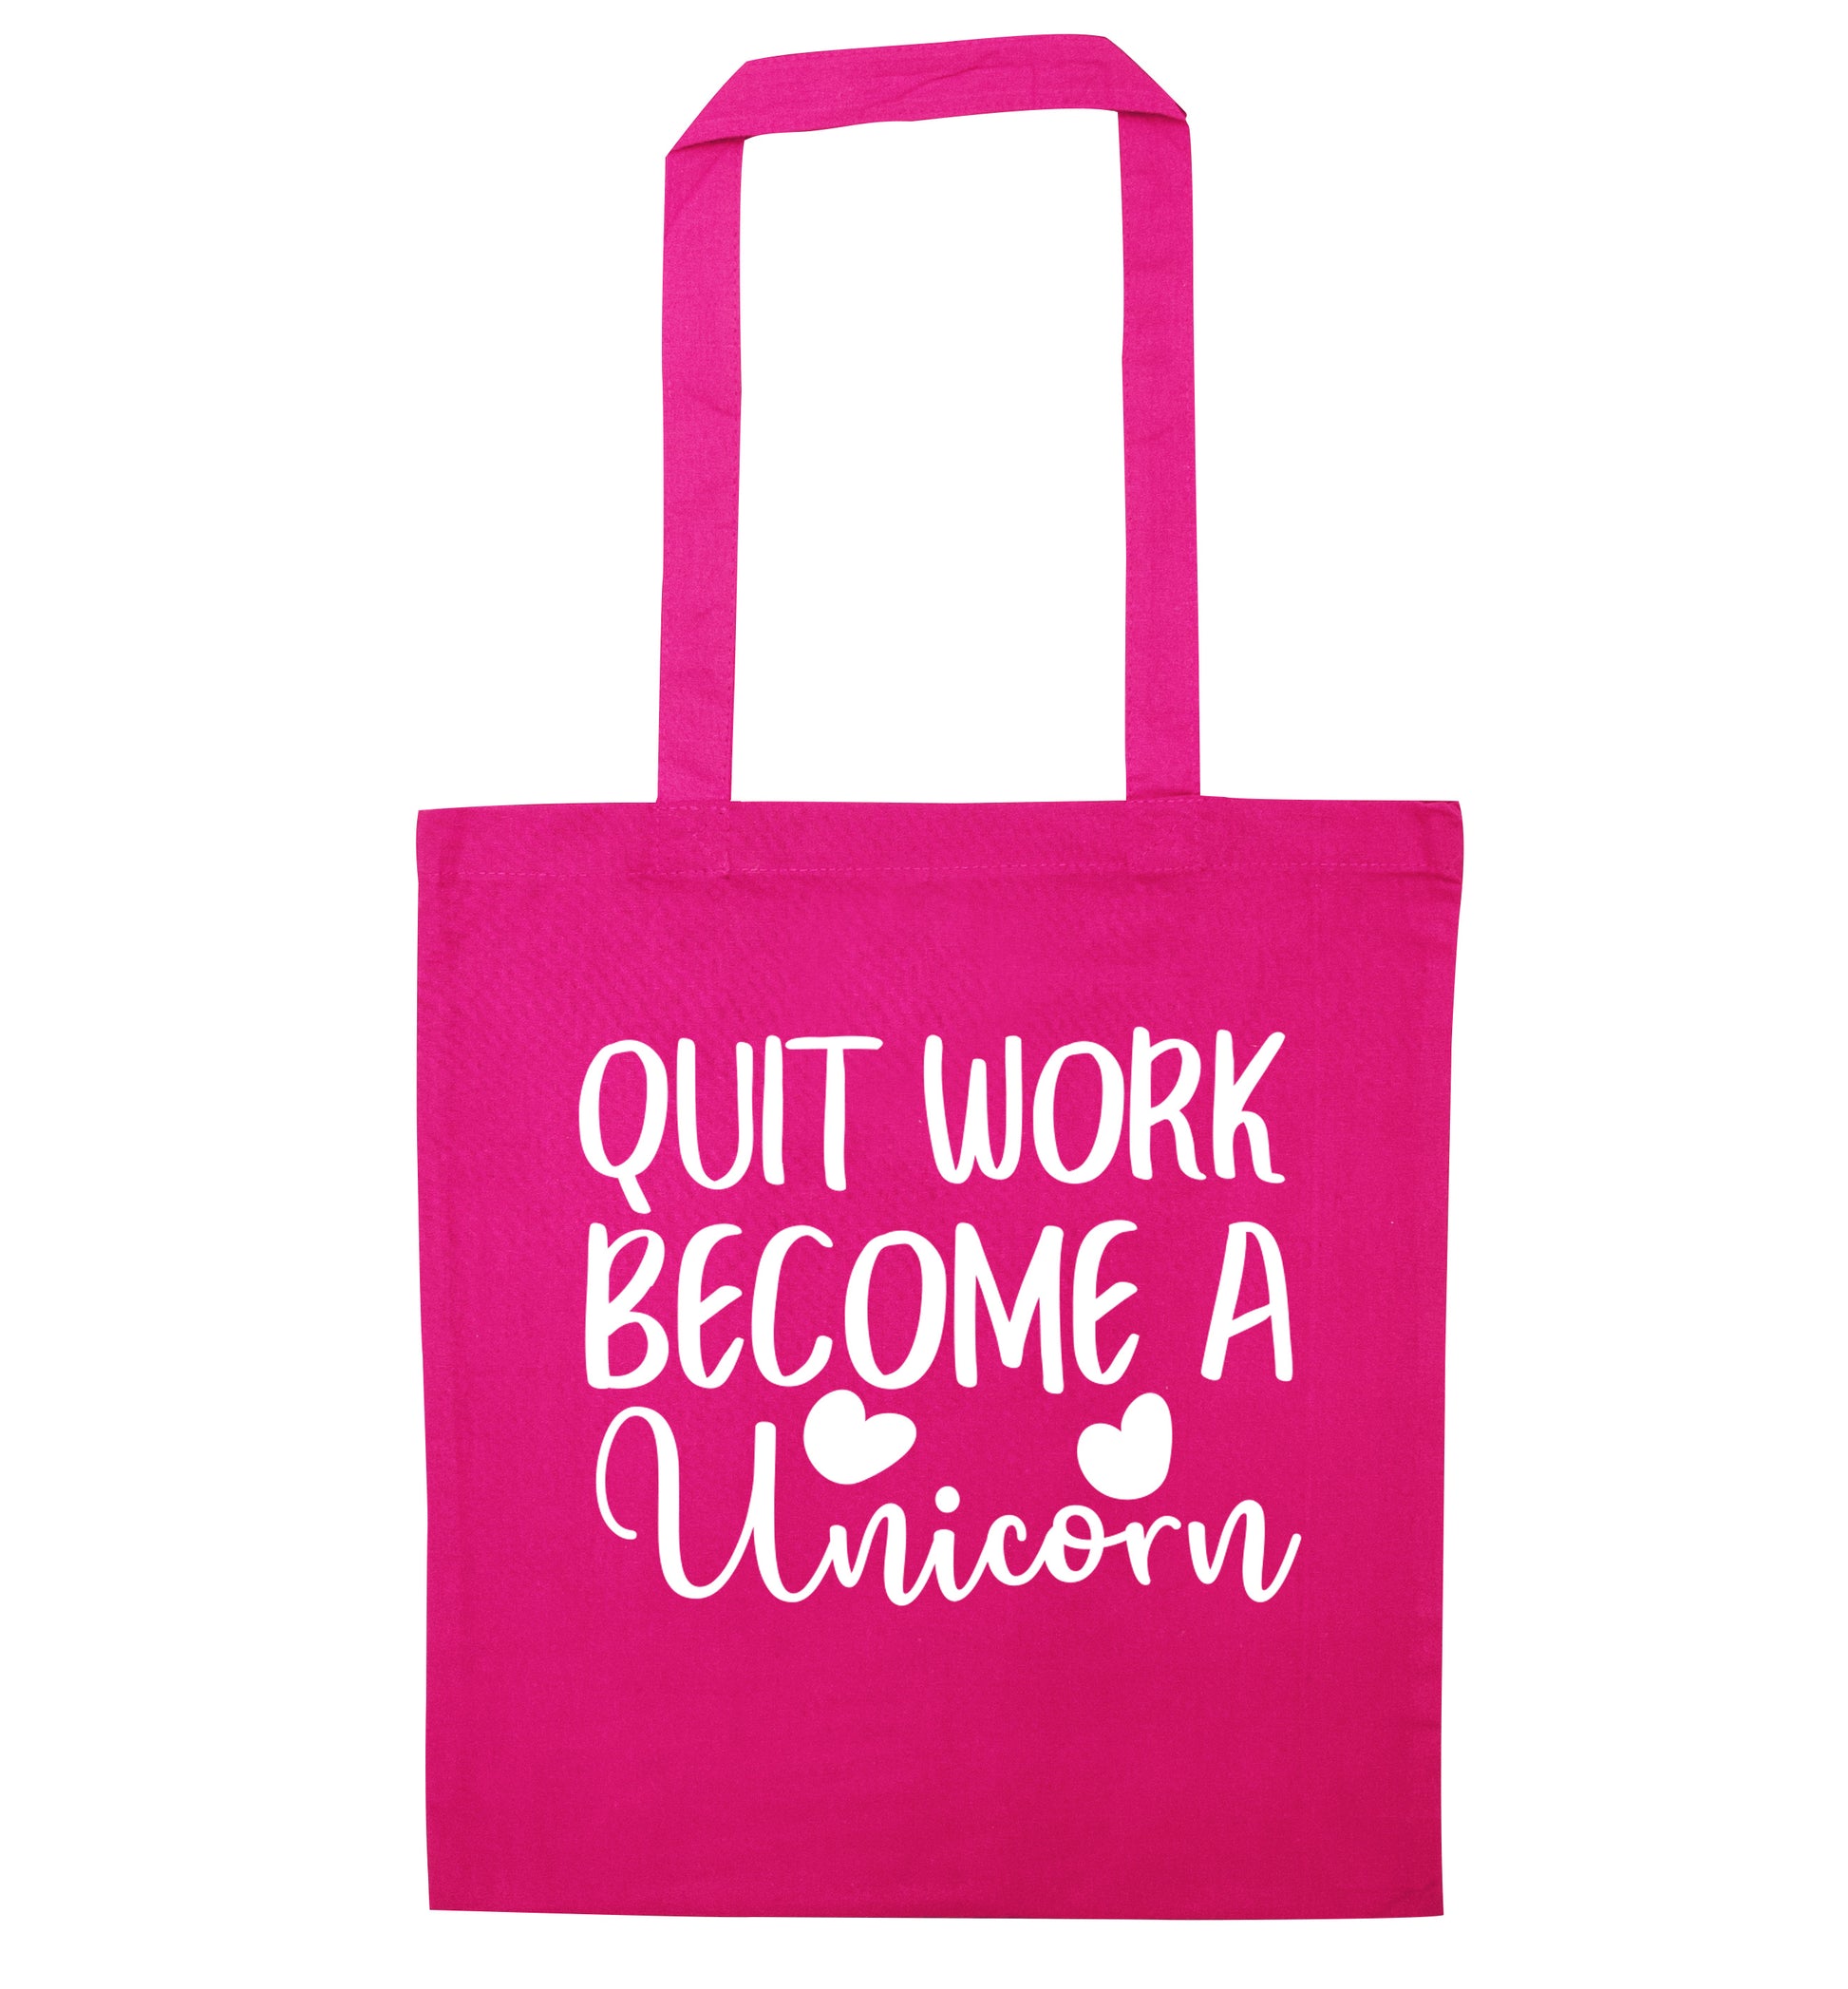 Quit work become a unicorn pink tote bag